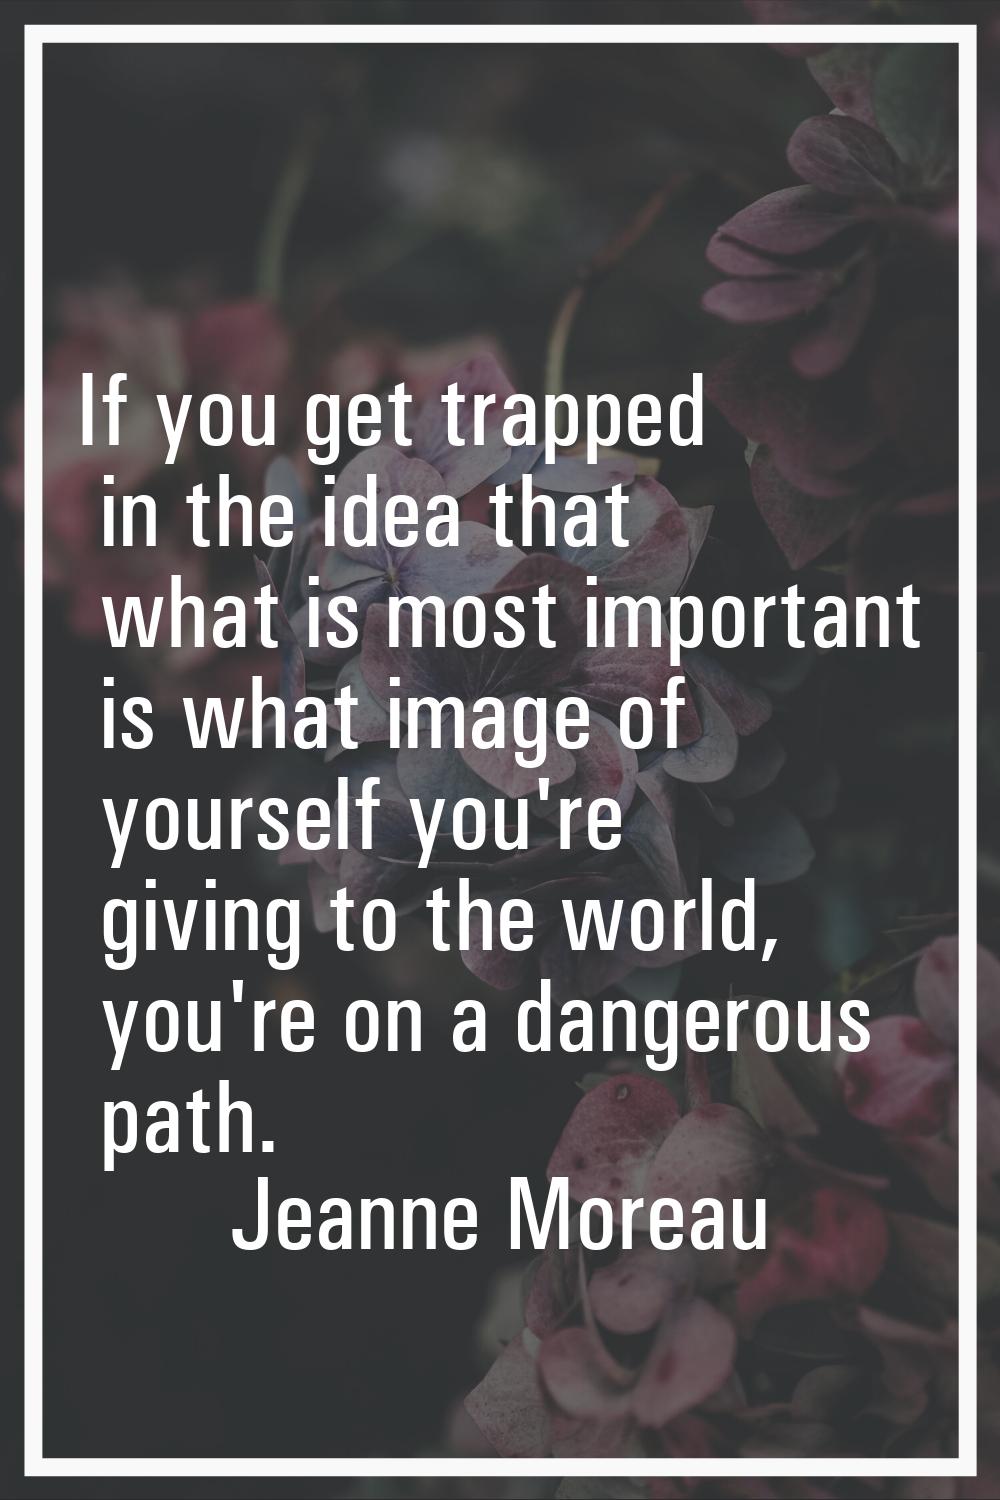 If you get trapped in the idea that what is most important is what image of yourself you're giving 